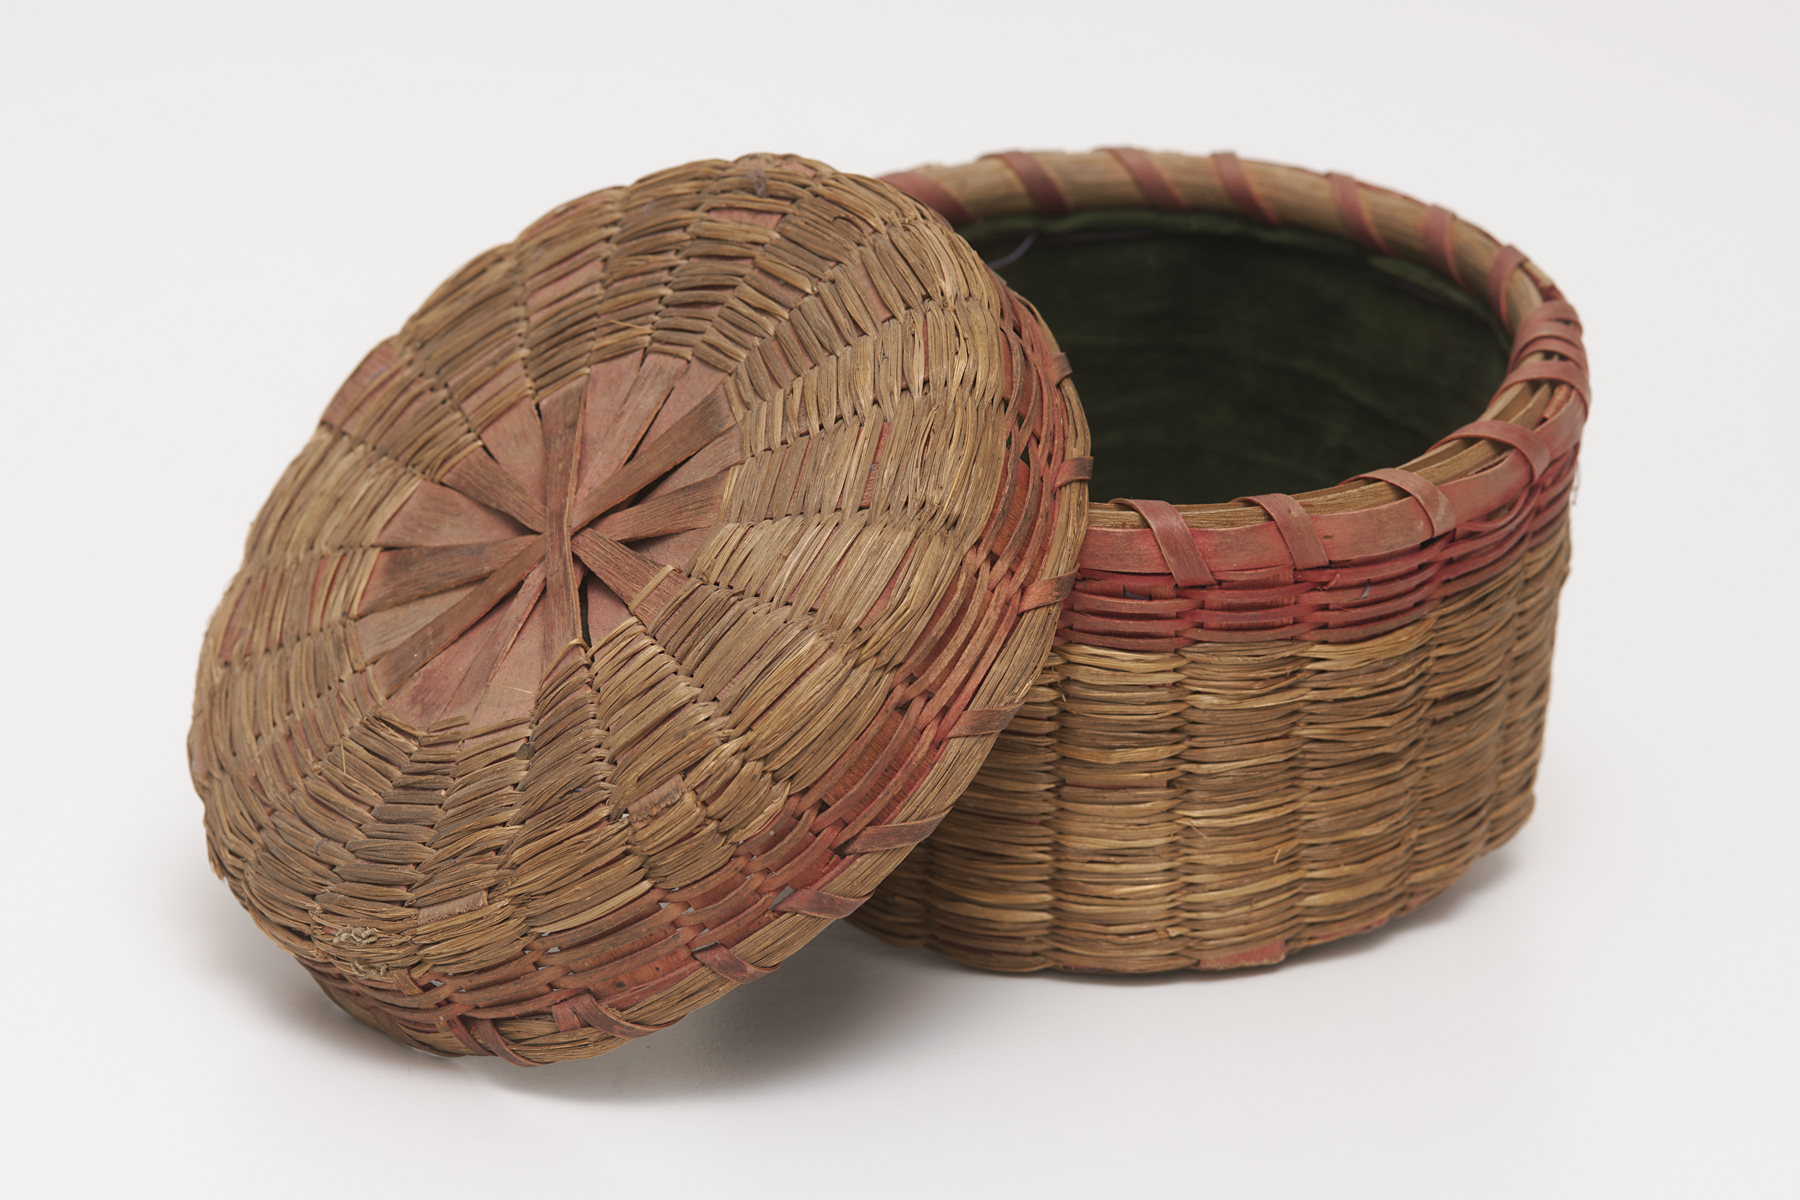 small basket with lid